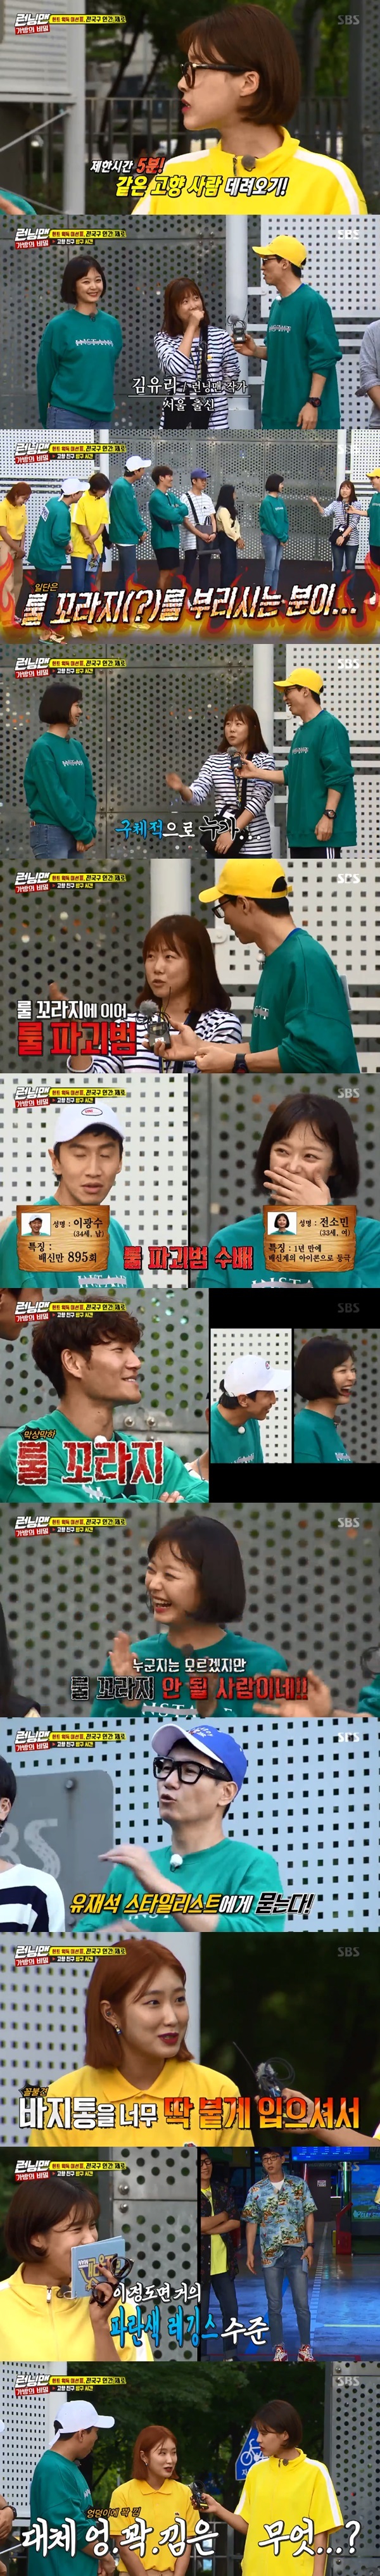 (Seoul =) = Yoo Jae-seok Cheating Tom 4 - Hair Cheating tom 4 - hair stylist wannabe Wannabe and Running Man writer who participated in the Running Man mission Game showed candid talks.On SBS Running Man, which was broadcast on the afternoon of the 23rd, there was a race to reveal the secret of the bag.The Game to get hints on the third mission was National Guernsey Zero: Running Man members had to bring the same hometown person in within five minutes of the time limit.The members showed up with a Running Man broadcasting official for the Game.Since then, the author of Running Man selected for the human zero Game and Yoo Jae-seok Cheating Tom 4 - Hair Cheating tom 4 - hair stylist wannabe Wannabe have been exposed.Asked if there is anything he would like to ask the performers, the Running Man writer said he would like to have no Rule Corage and Rule Destroyer.Everyone noticed that it was Kim Jong Kook even if he did not identify who the rule was, followed by Jeon So-min and Lee Kwang-soo as the rule destroyers.Asked who was more of a rule-breaker and rule-breaker, the artist laughed without hesitation, saying rule-breaker.Yoo Jae-seok said, The production team can develop because it plays a rule, Kim Jong-guk said.Afterwards, Yoo Jae-seoks Cheating Tom 4 - Hair Cheating tom 4 - hair stylist wannabe Wannabe asked Yoo Jae-seok about the point that he wanted to fix it.The Cheating Tom 4 - Hair Cheating tom 4 - hair stylist wannabe Wannabe pointed out that he wears his pants too tight. Yoo Jae-seok prefers tight clothes.So Jang Do-yeon said, If you like skinny, please do body painting.On the other hand, Running Man is a program that solves the missions of the best entertainers in Korea and reveals the hidden back of the Korean landmarks through constant rush and tense confrontation.It airs every Sunday at 4:50 p.m.